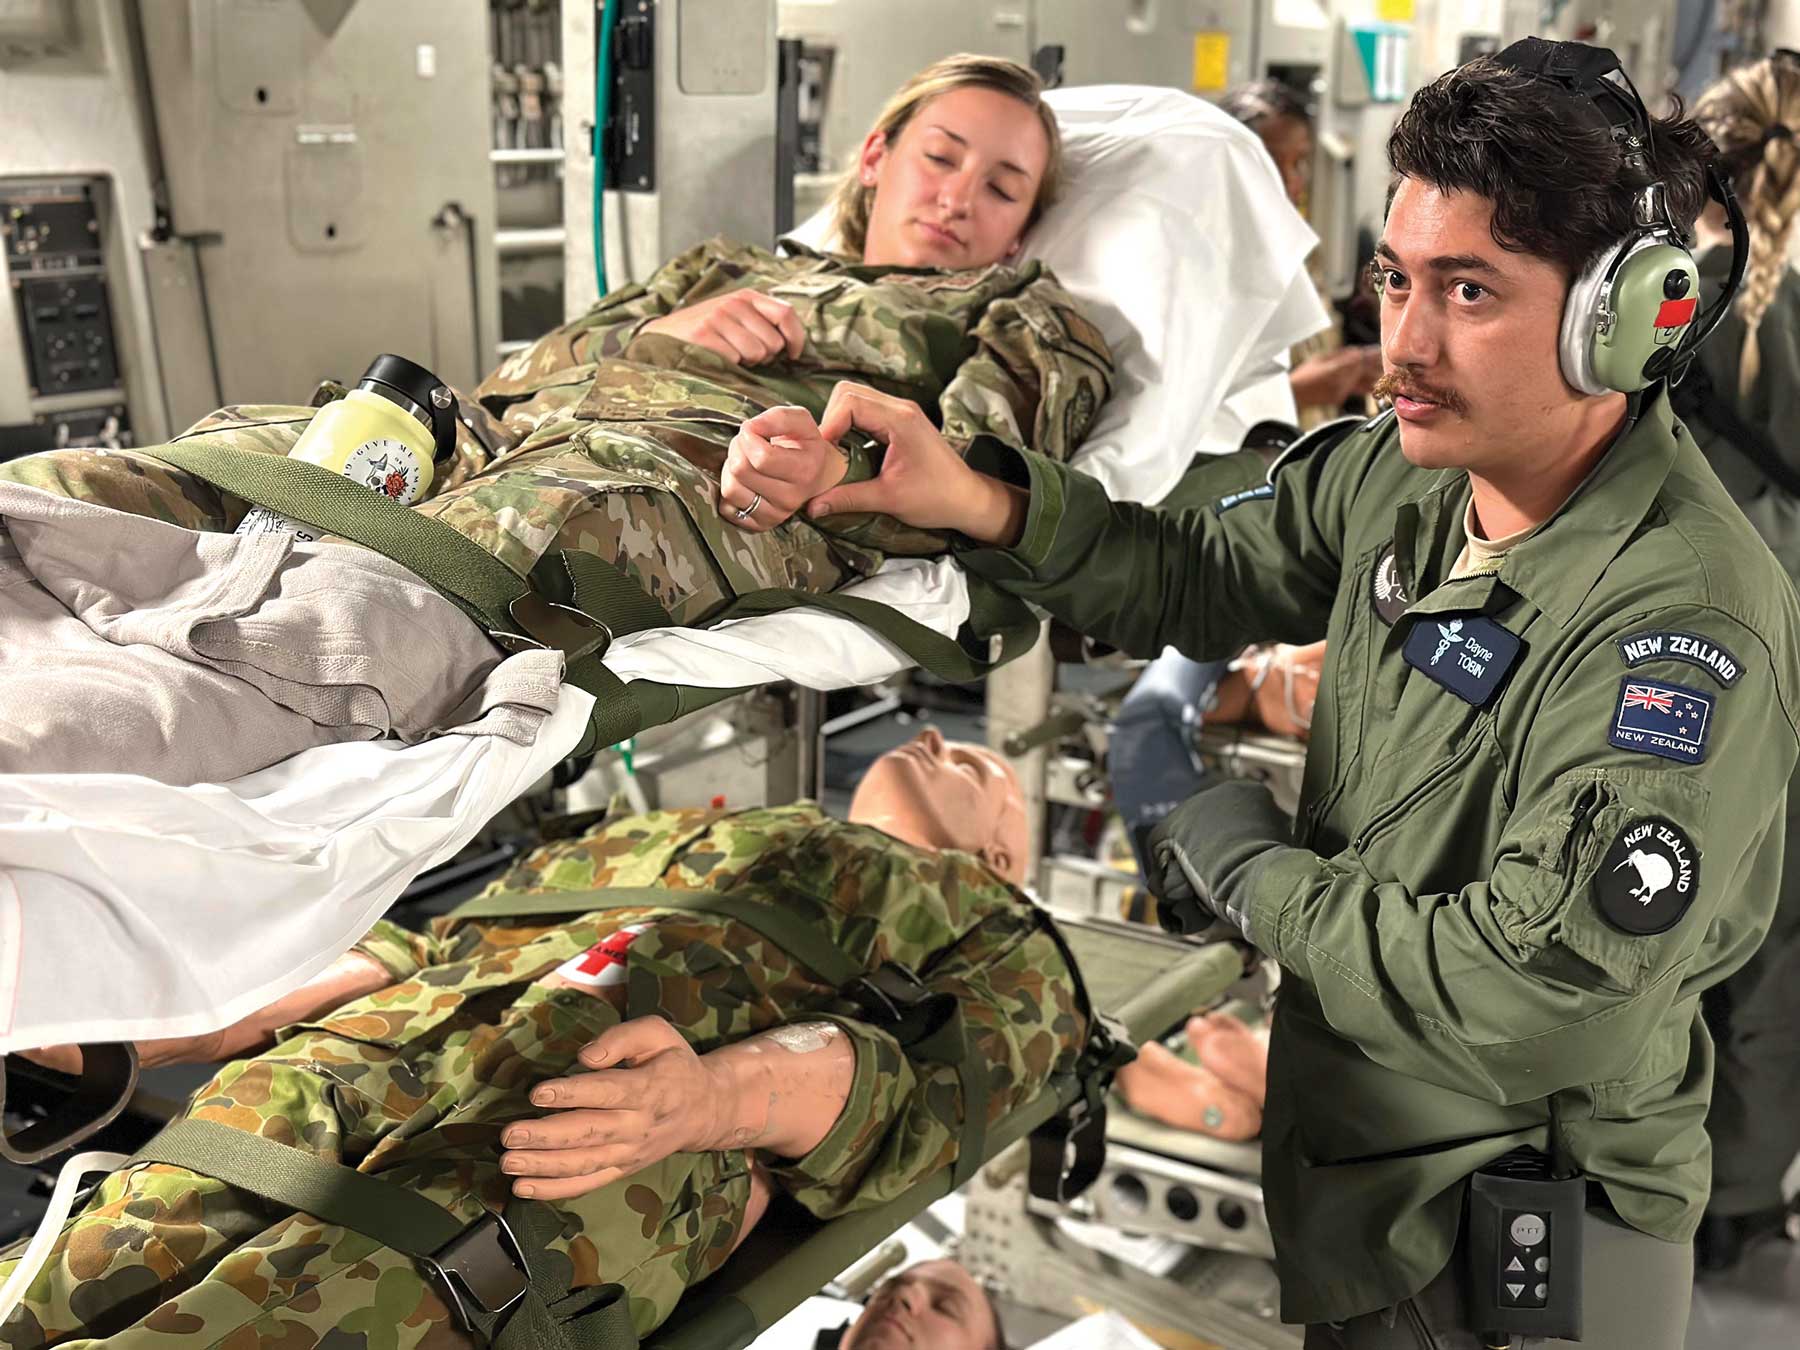 A soldier is sitting on the hospital bed